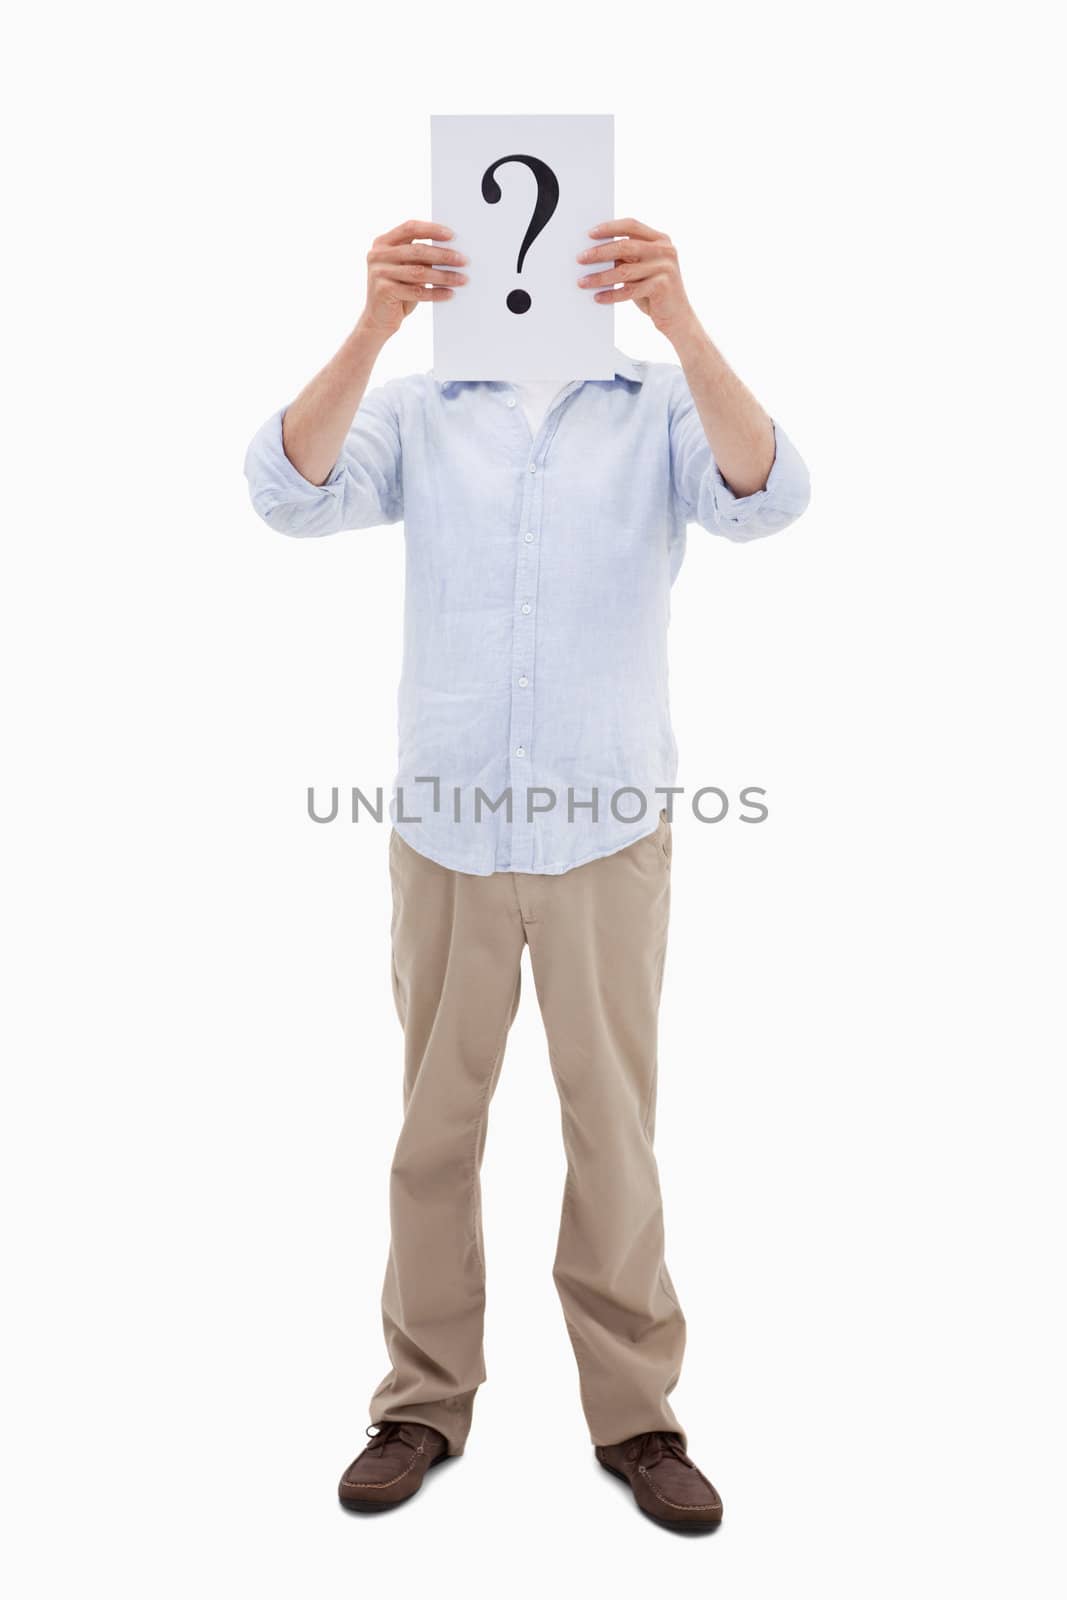 Portrait of a man holding a question mark on a paper by Wavebreakmedia